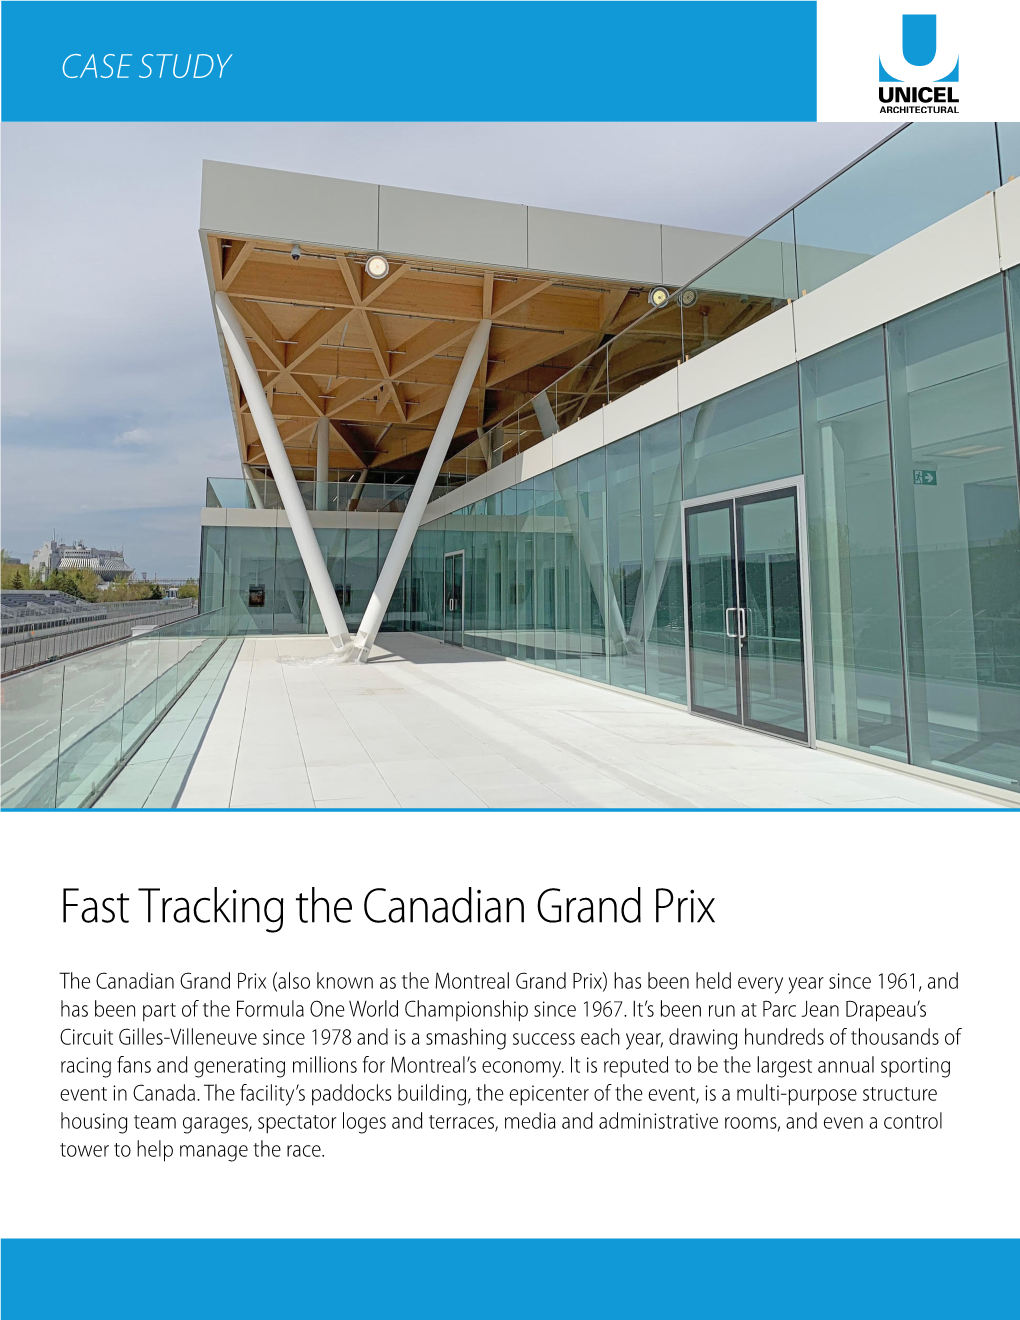 Fast Tracking the Canadian Grand Prix